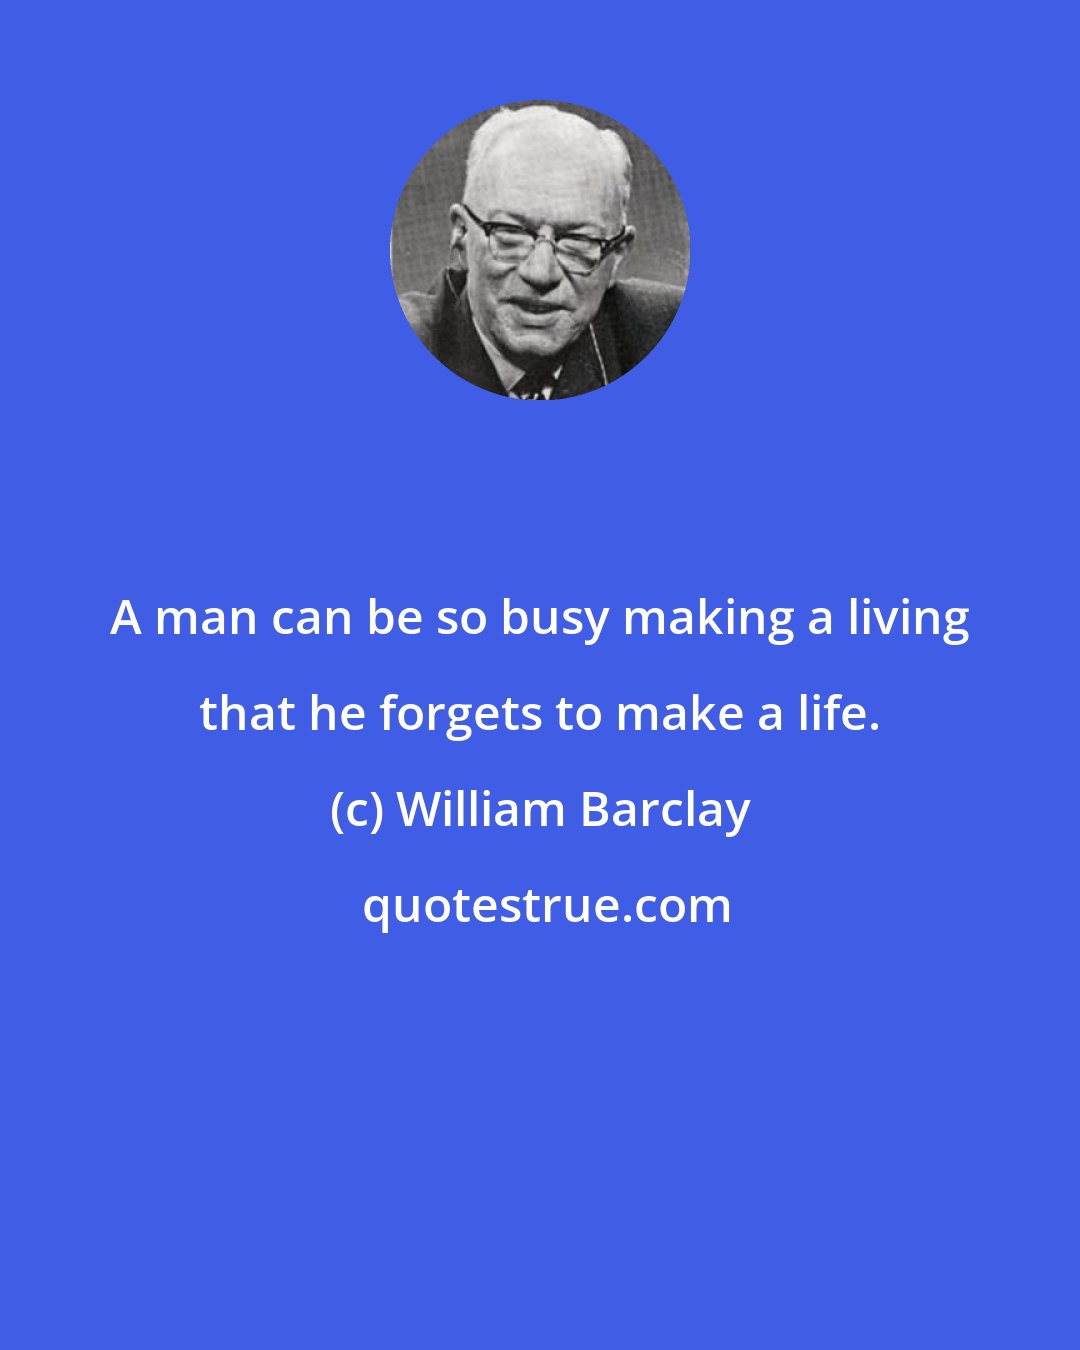 William Barclay: A man can be so busy making a living that he forgets to make a life.